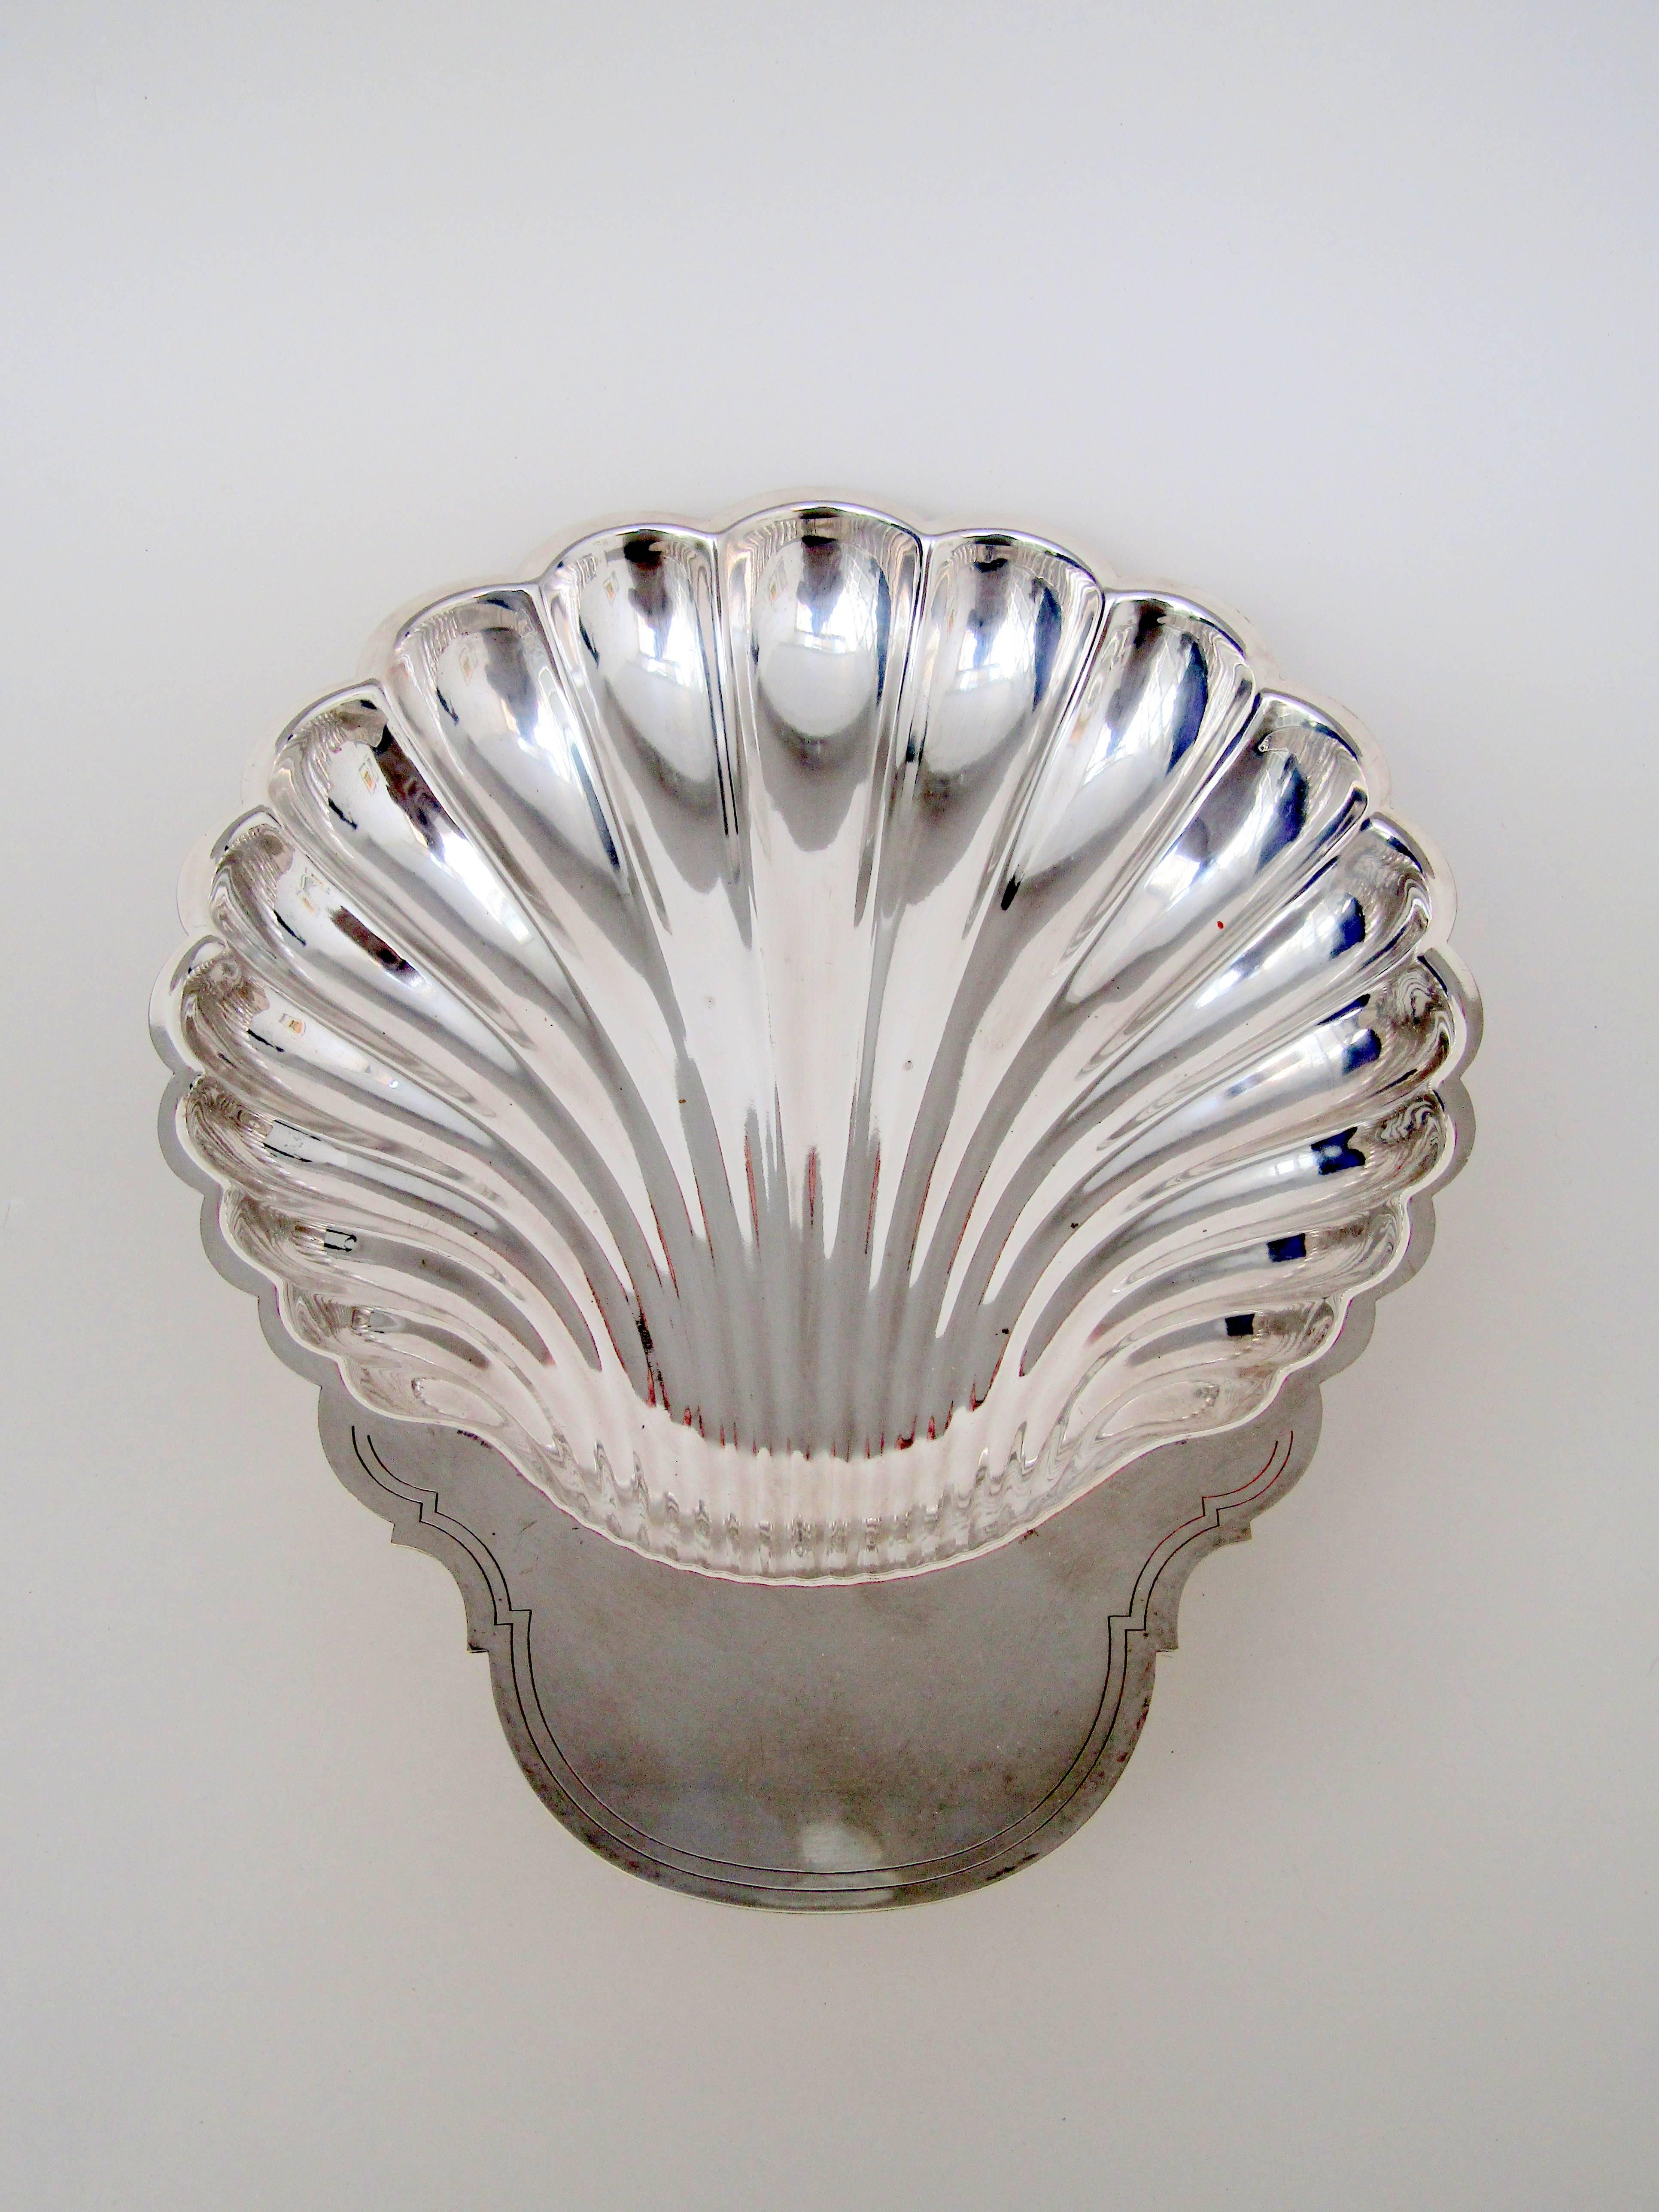 A large sliver plate dish in the shape of a scallop shell by Fleuron
Stamped Fleuron France.
 